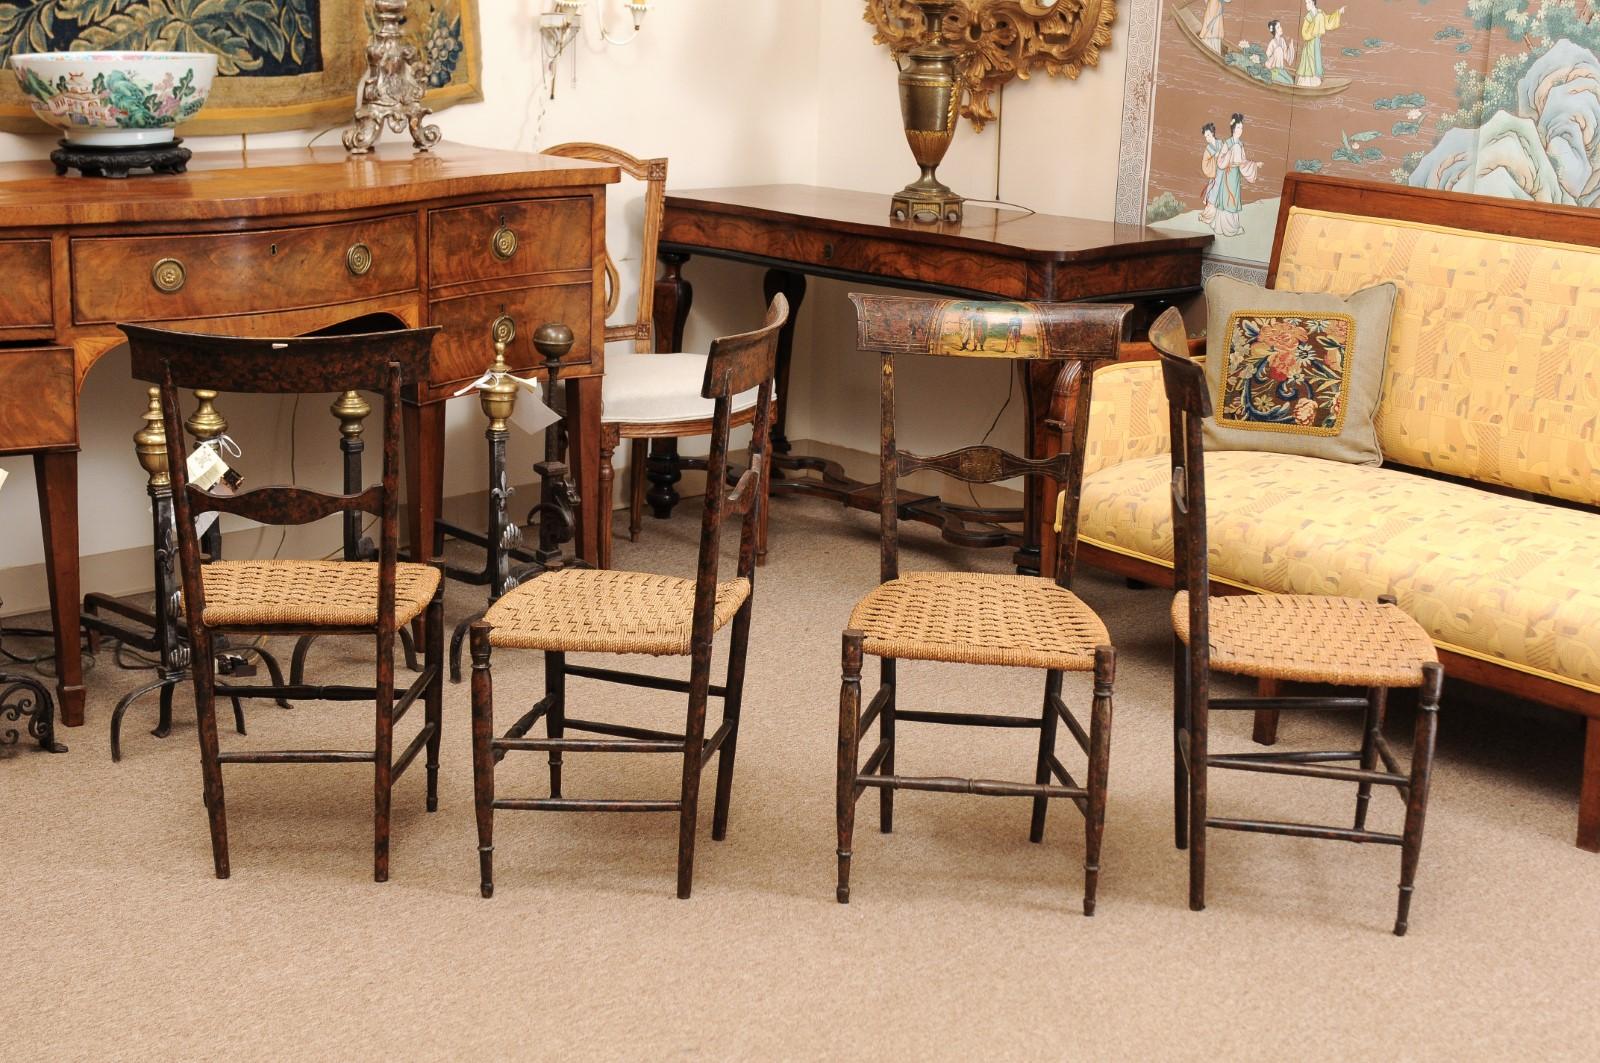 Pair of Neoclassical Black Painted Side Chairs with Woven Seats, Italy ca. 1790 For Sale 8